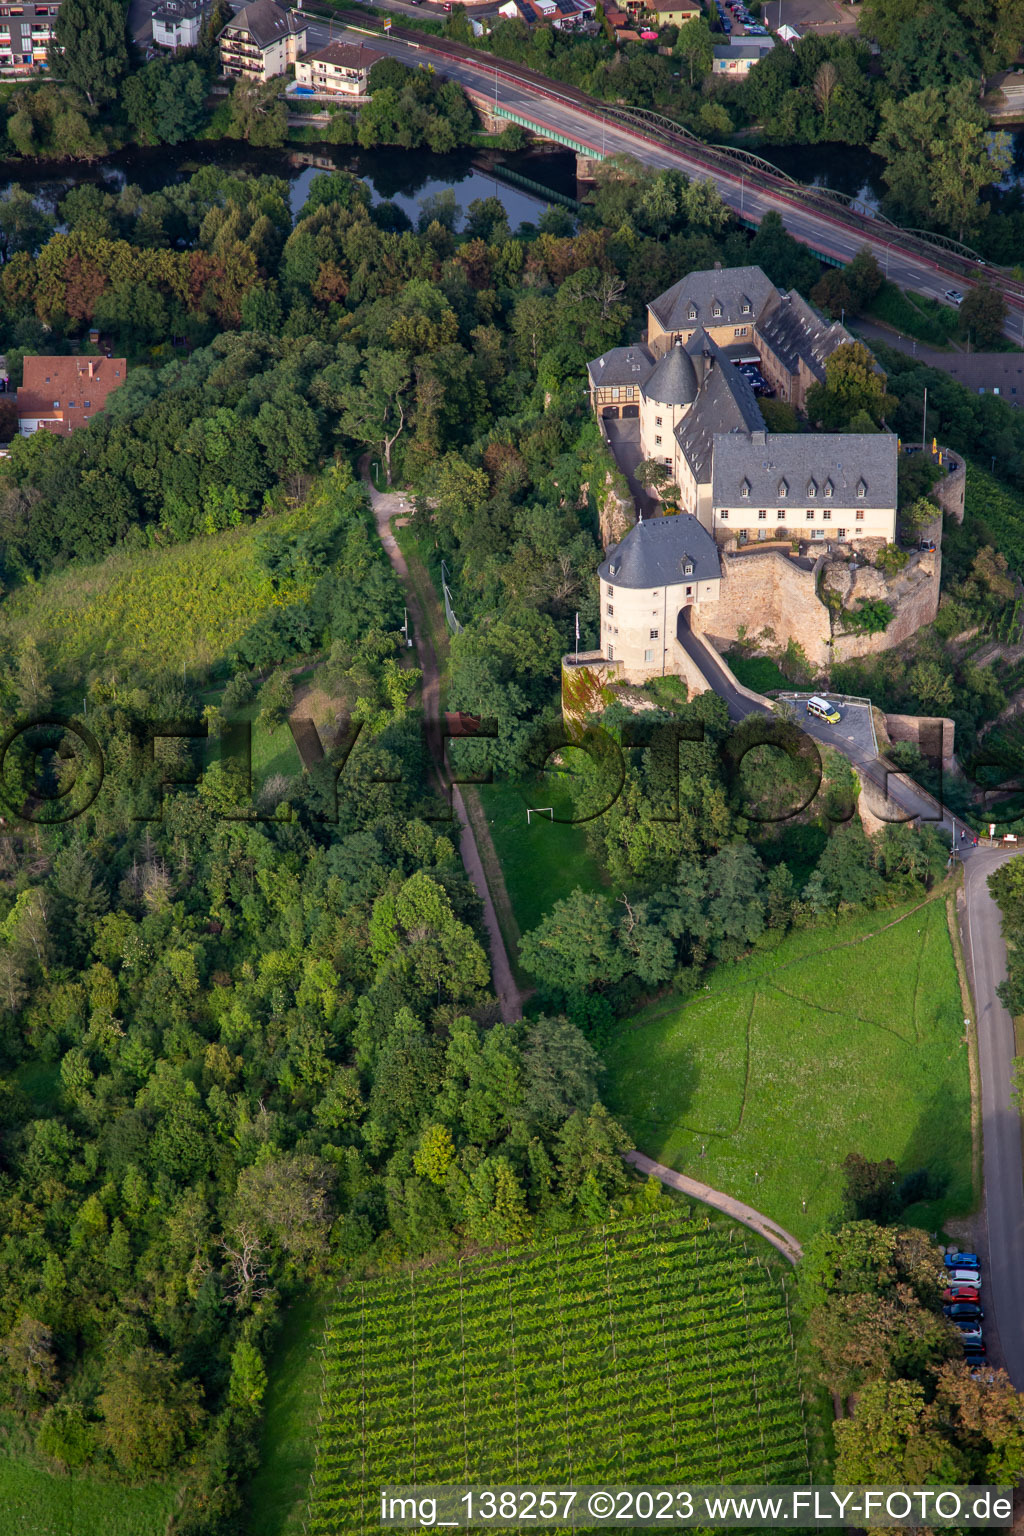 Aerial photograpy of Castle Ebernburg / Protestant family holiday and educational center Ebernburg in the district Ebernburg in Bad Kreuznach in the state Rhineland-Palatinate, Germany